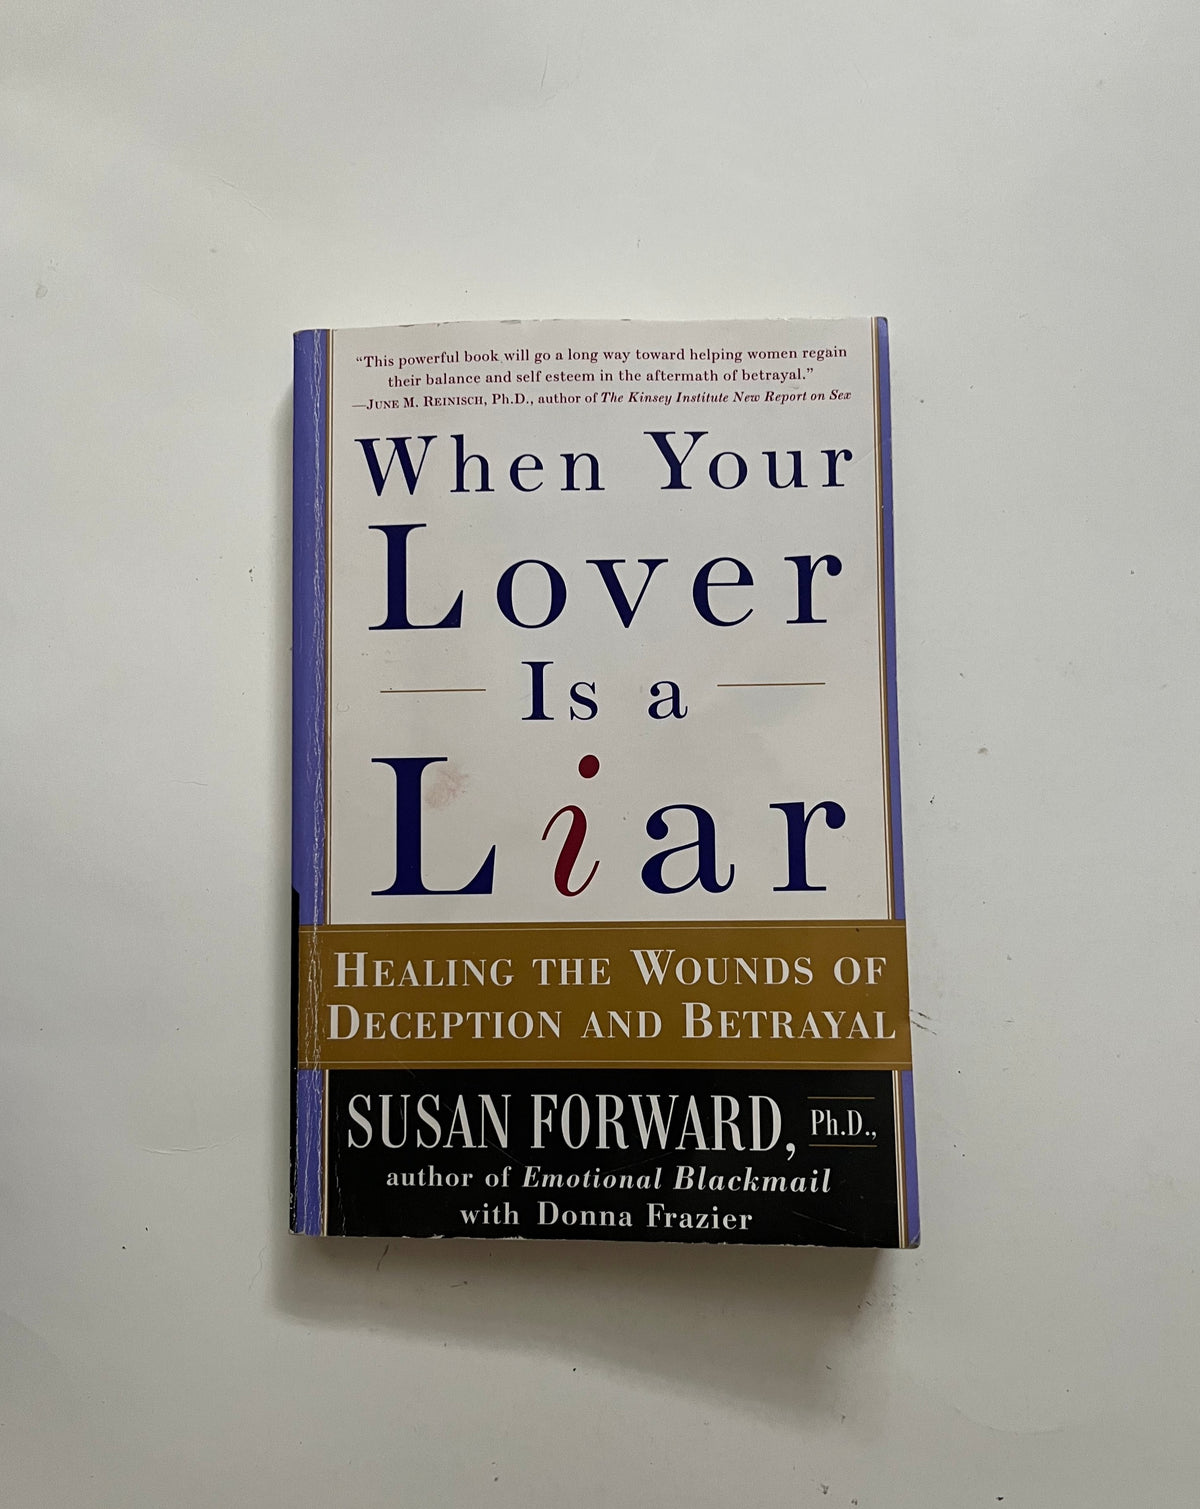 When Your Lover is a Liar: Healing the Wounds of Deception and Betrayal by Susan Forward